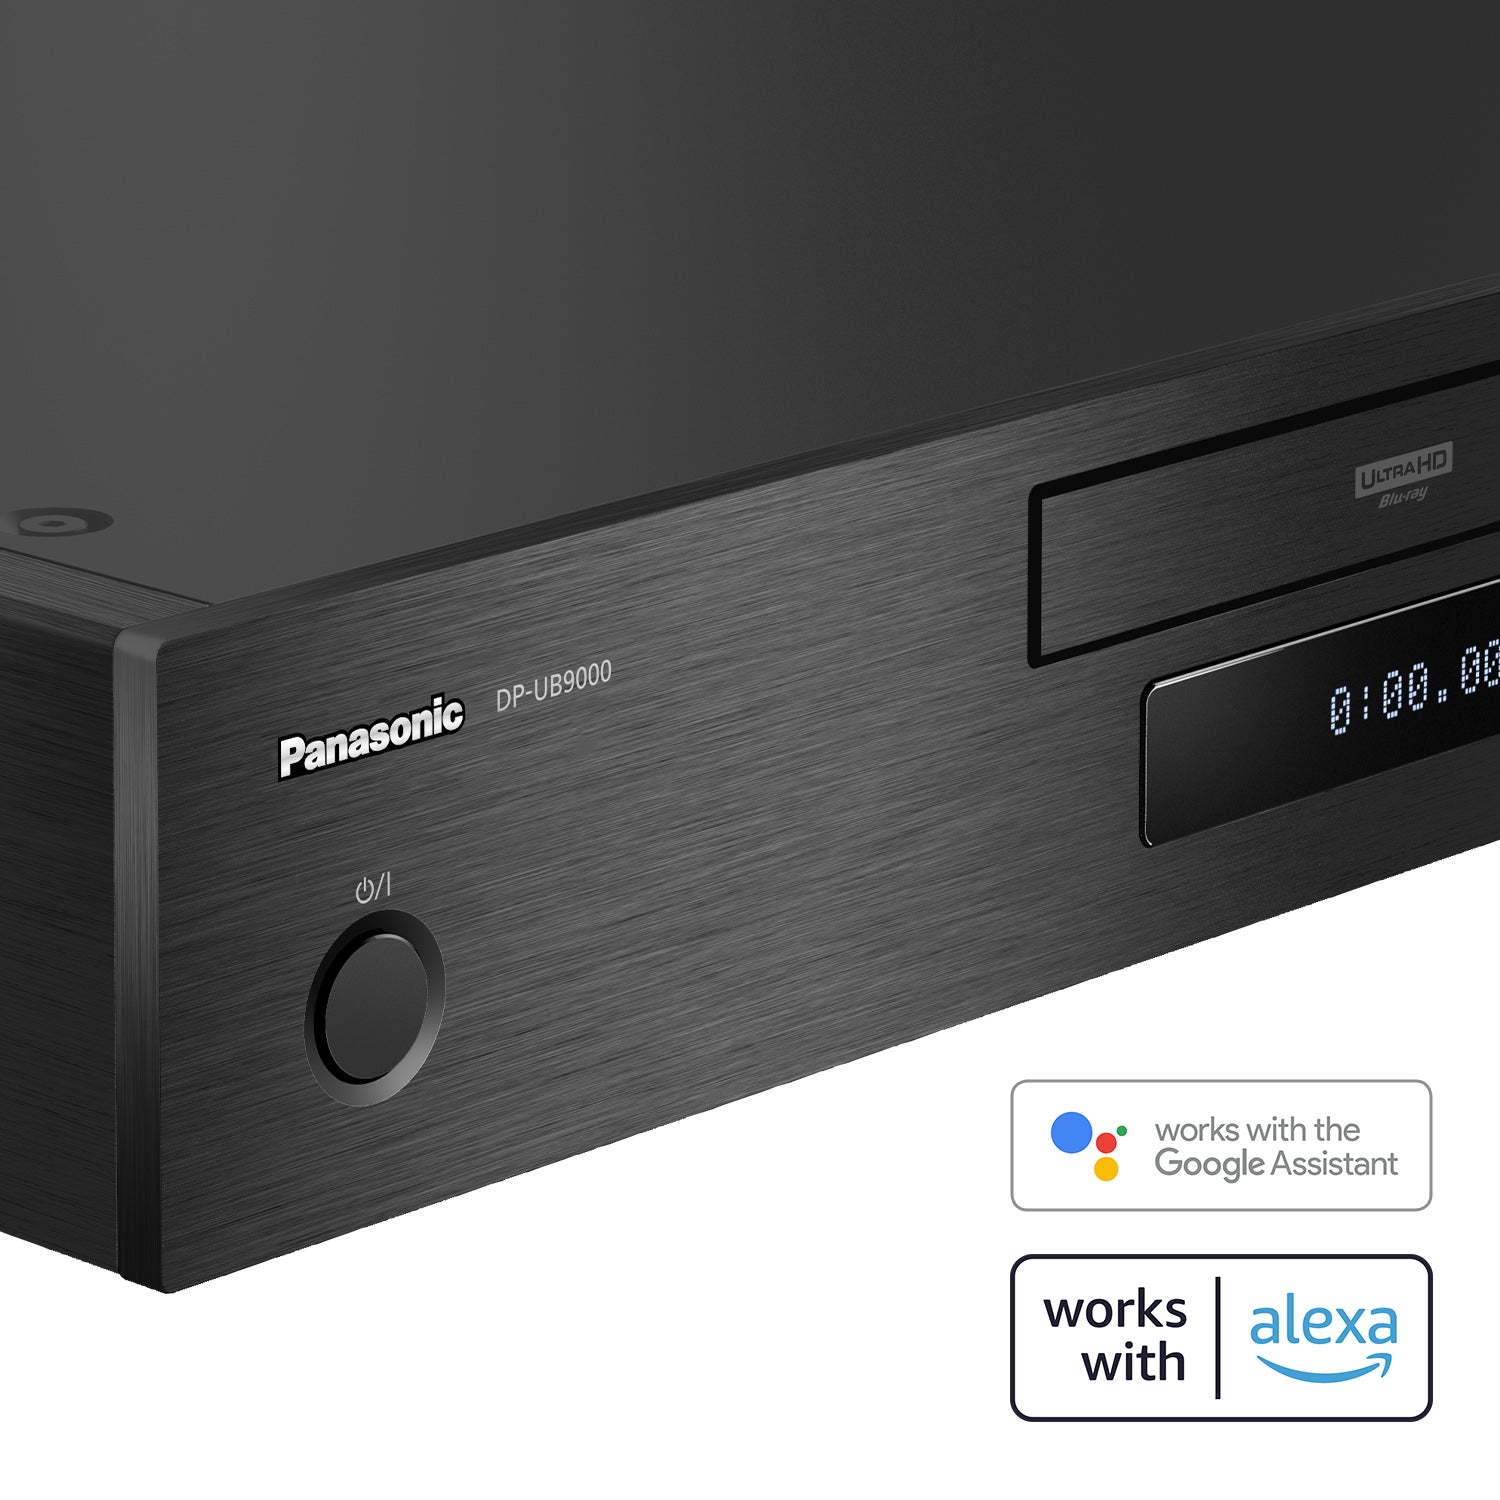 Panasonic Reference Class 4K Ultra Hi-Res - HD Ultra HD Vision, Blu-ray with Video HDR10+, DP-UB9000P1K Dolby Premium Player Playback, Audio